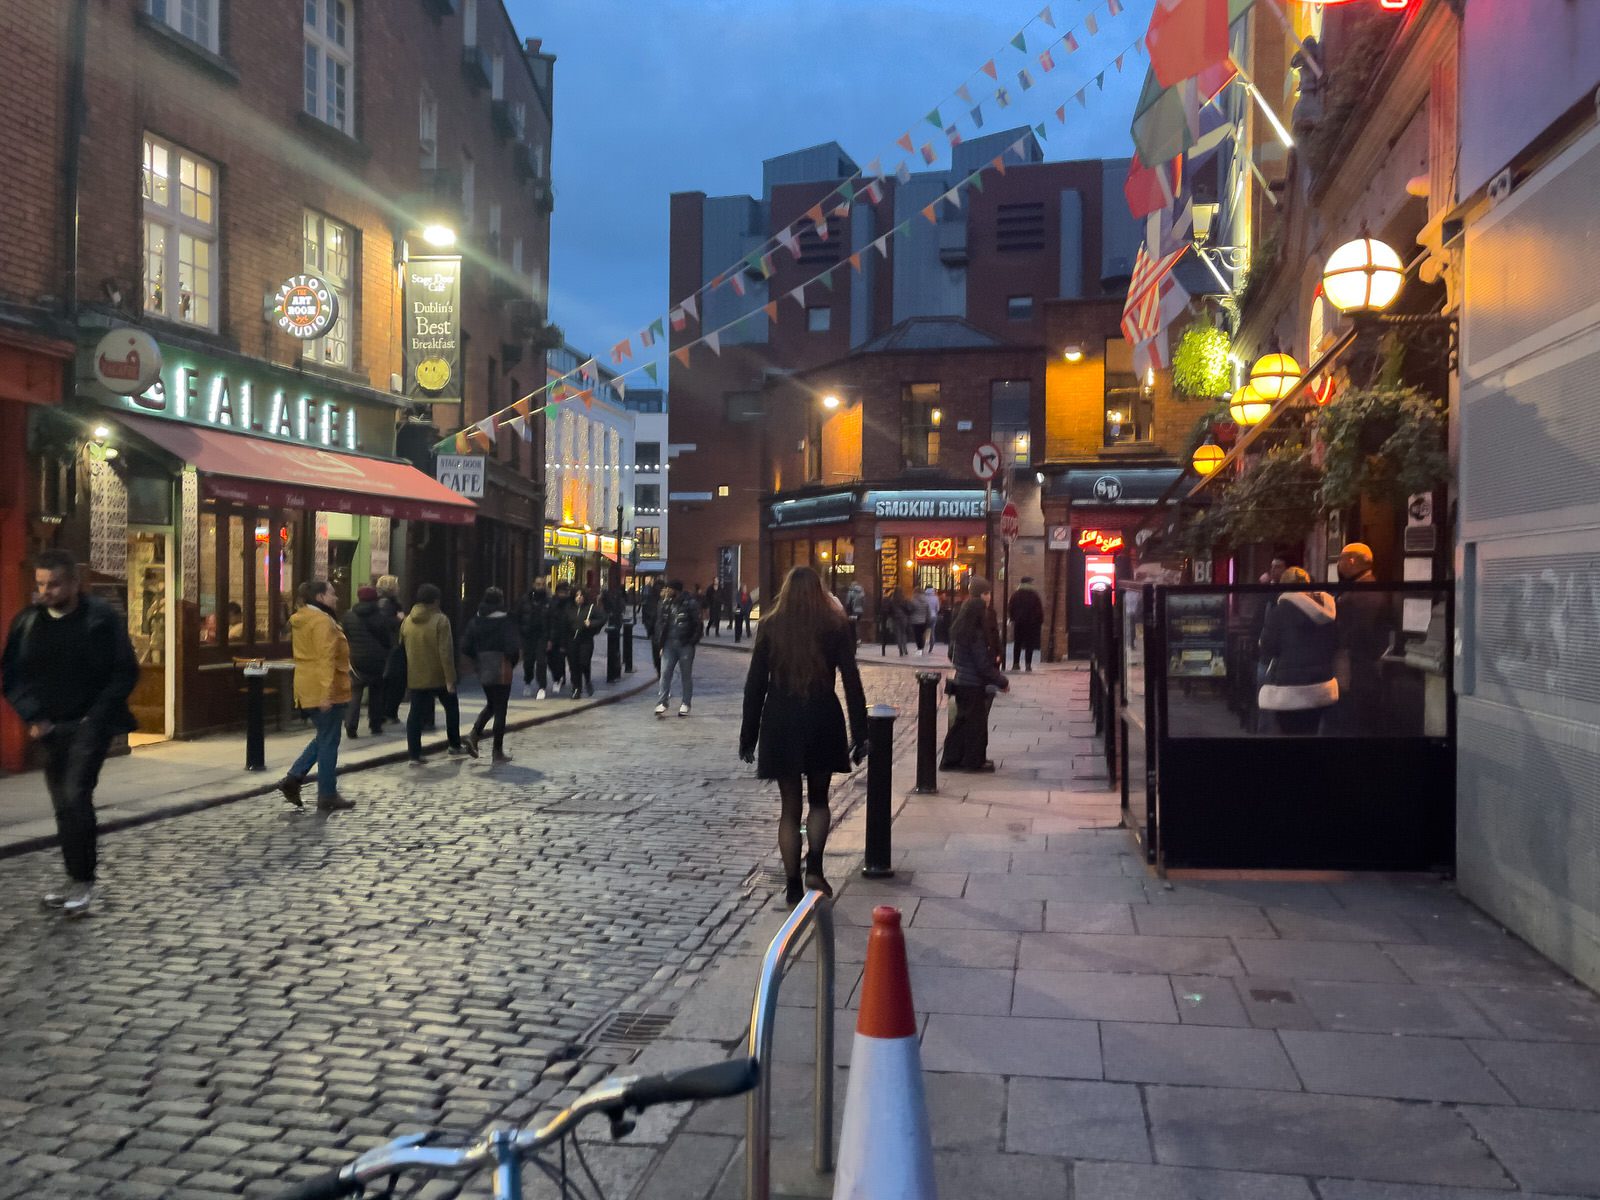 I VISITED TEMPLE BAR TODAY [AS NIGHTFALL WAS APPROACHING]-225371-1